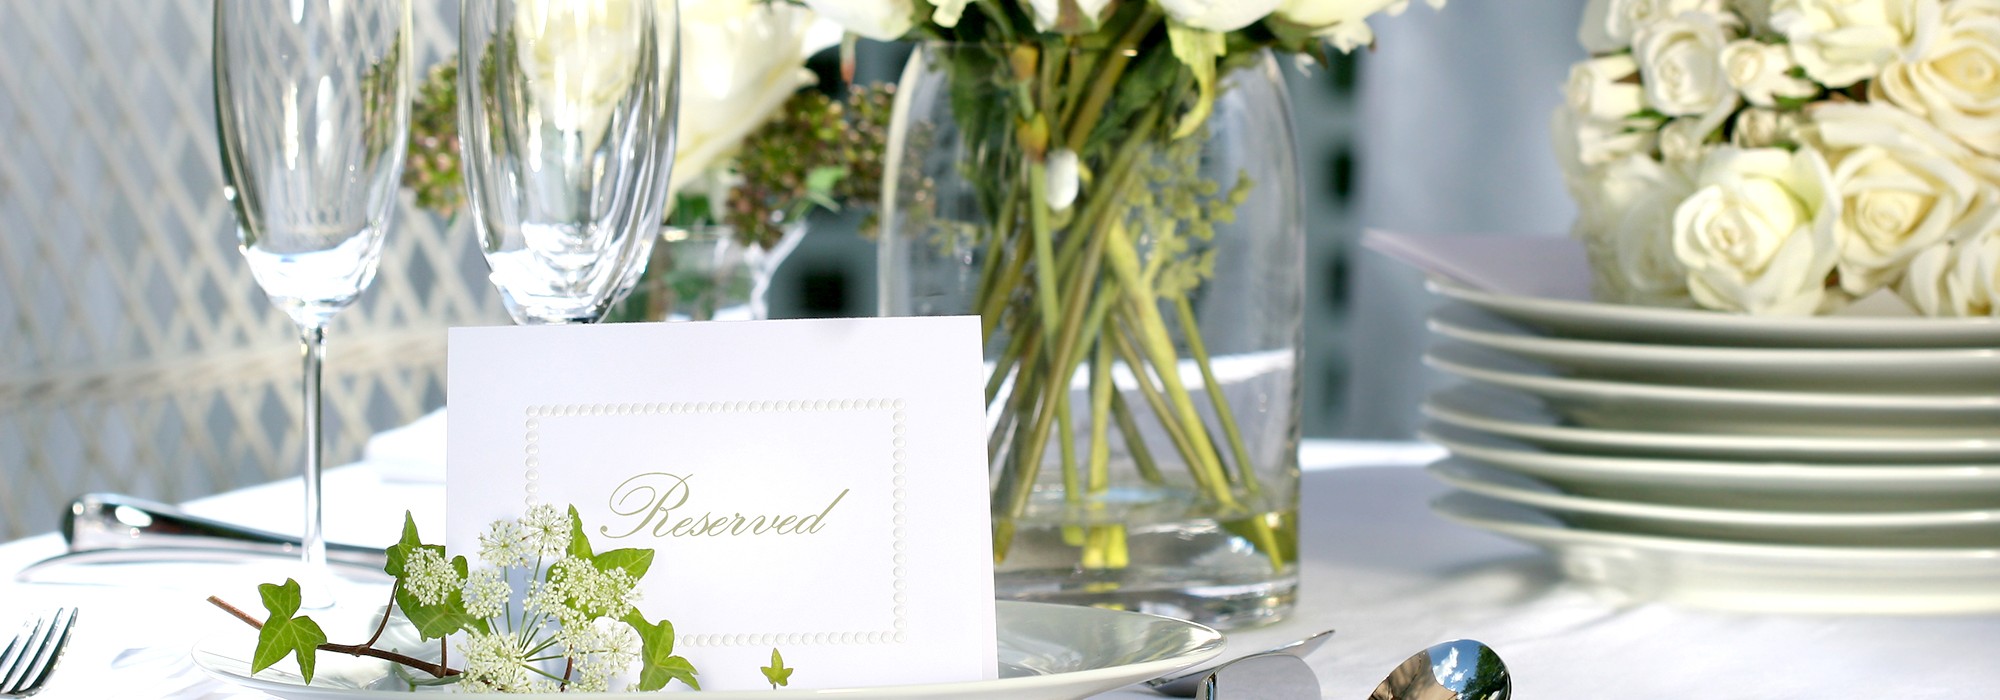 Reserved Table Setting